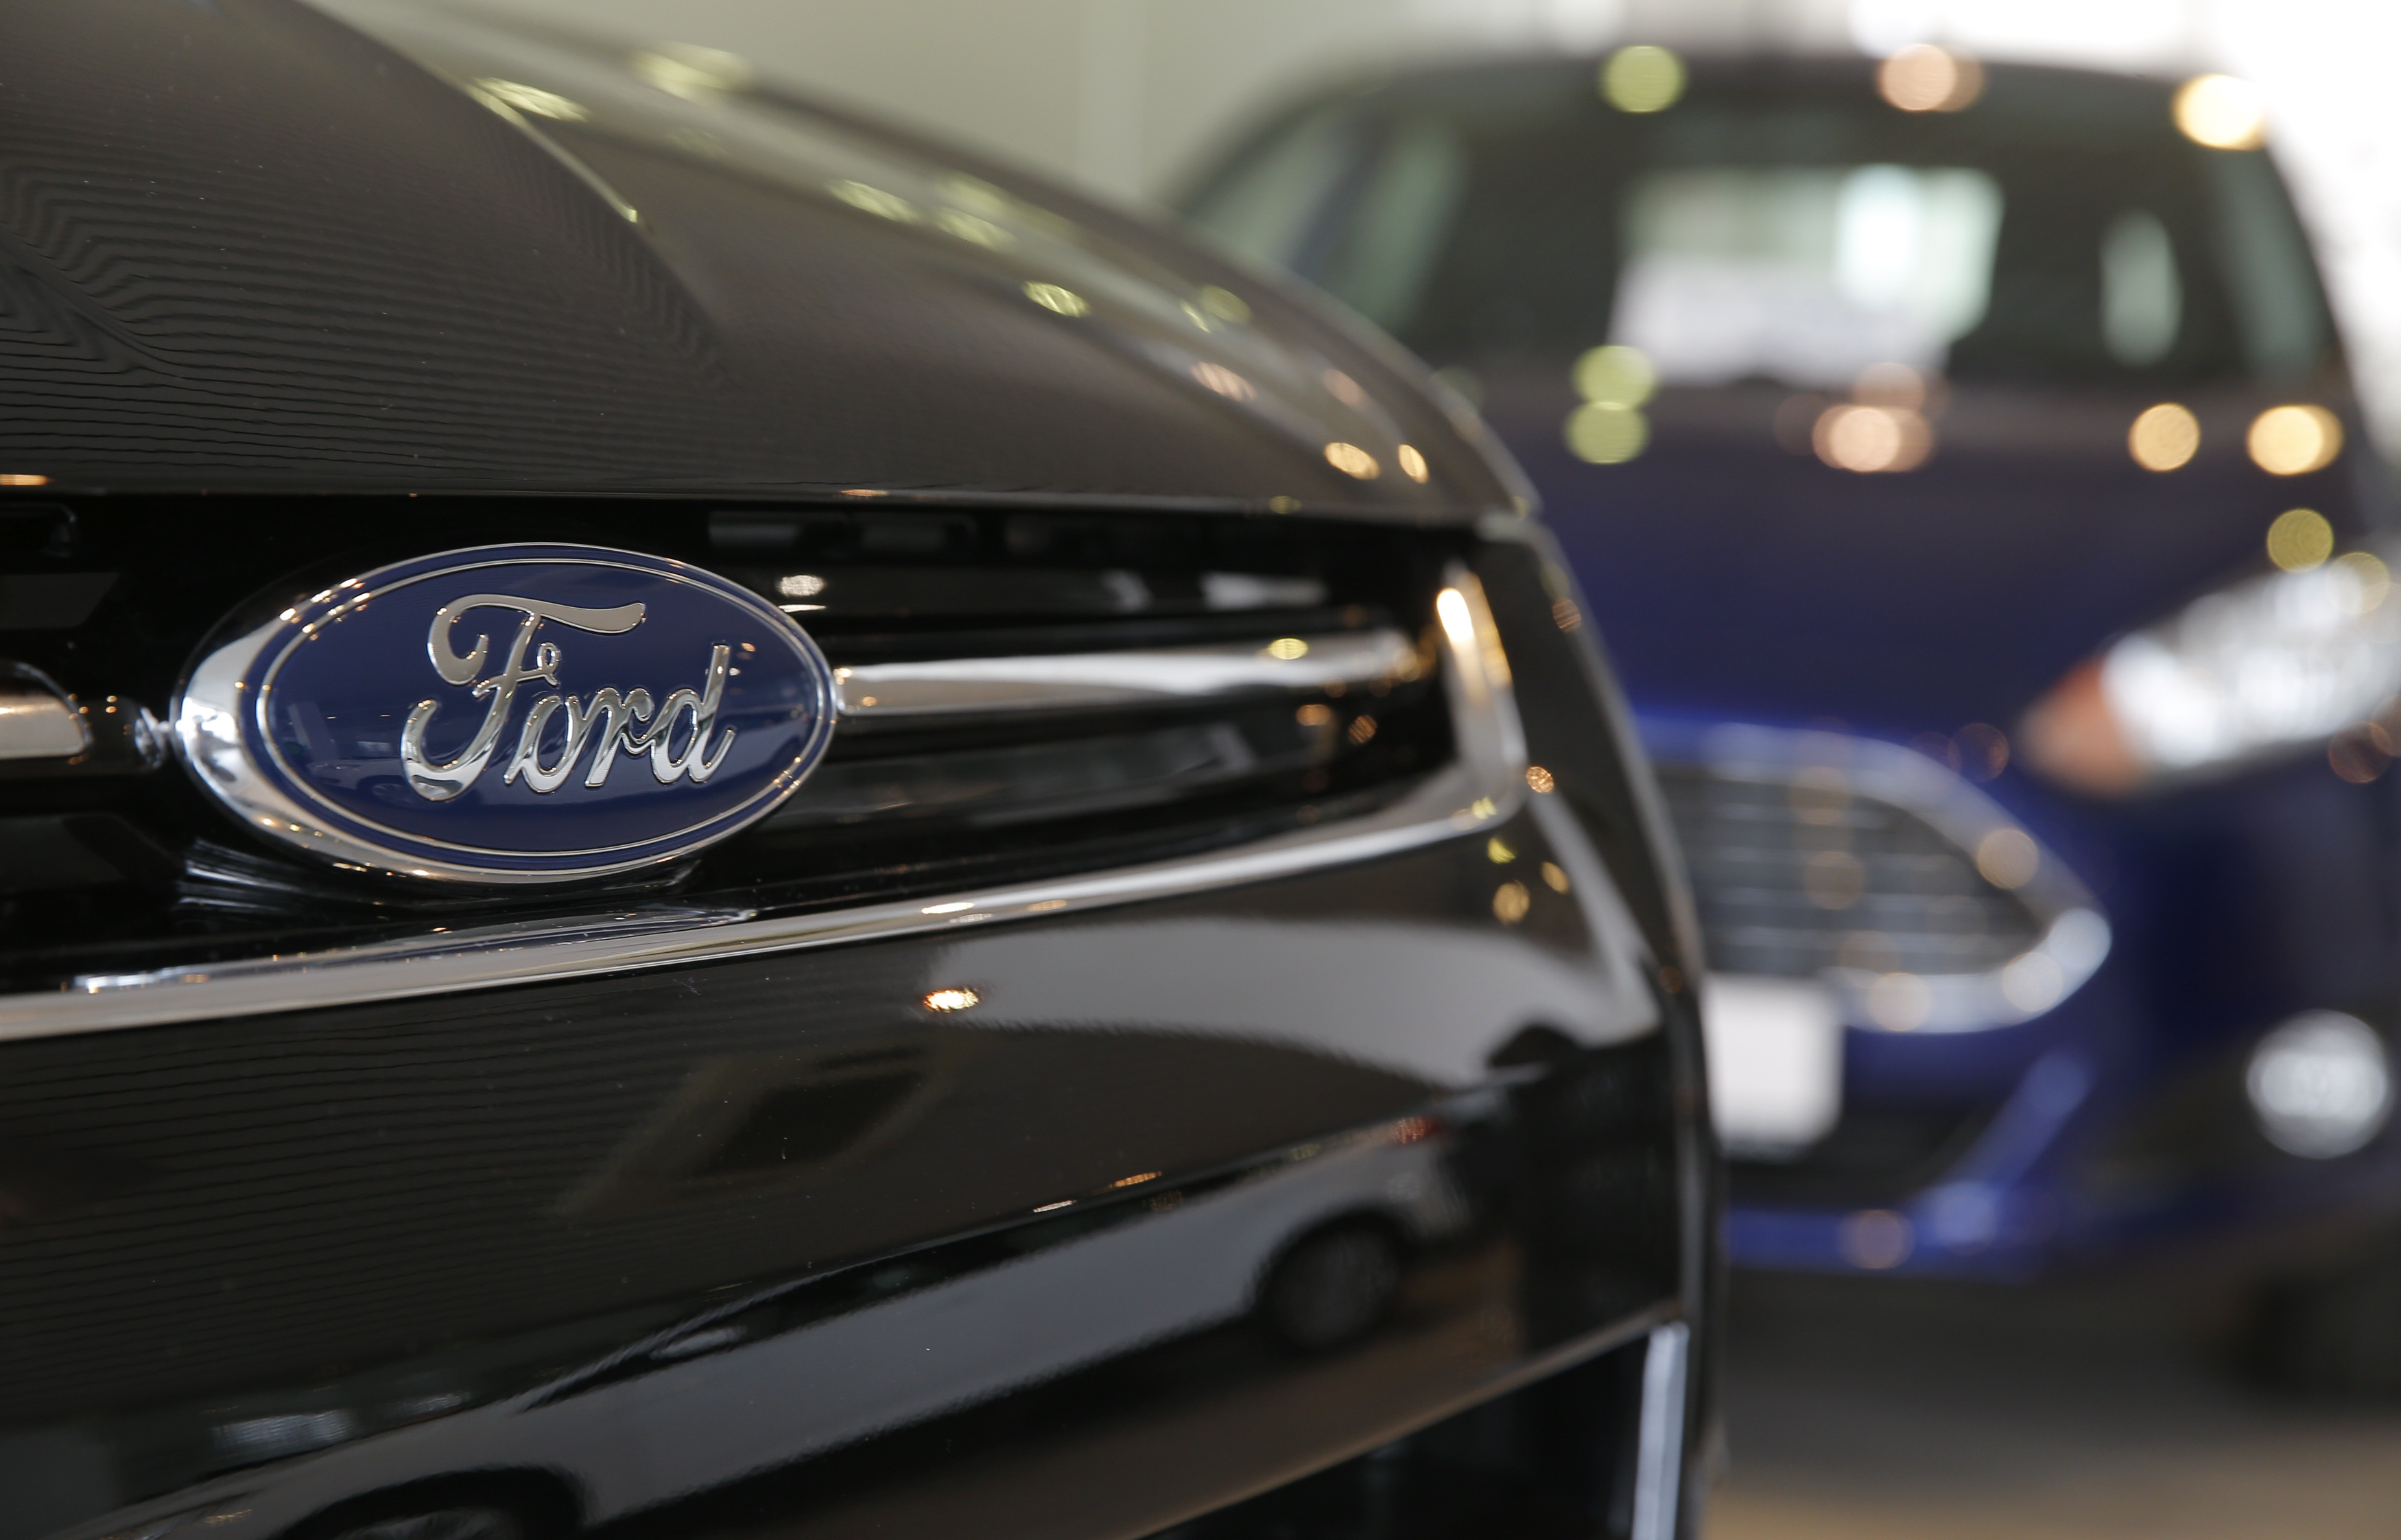 Ford cars are on sale at a dealership in Moscow